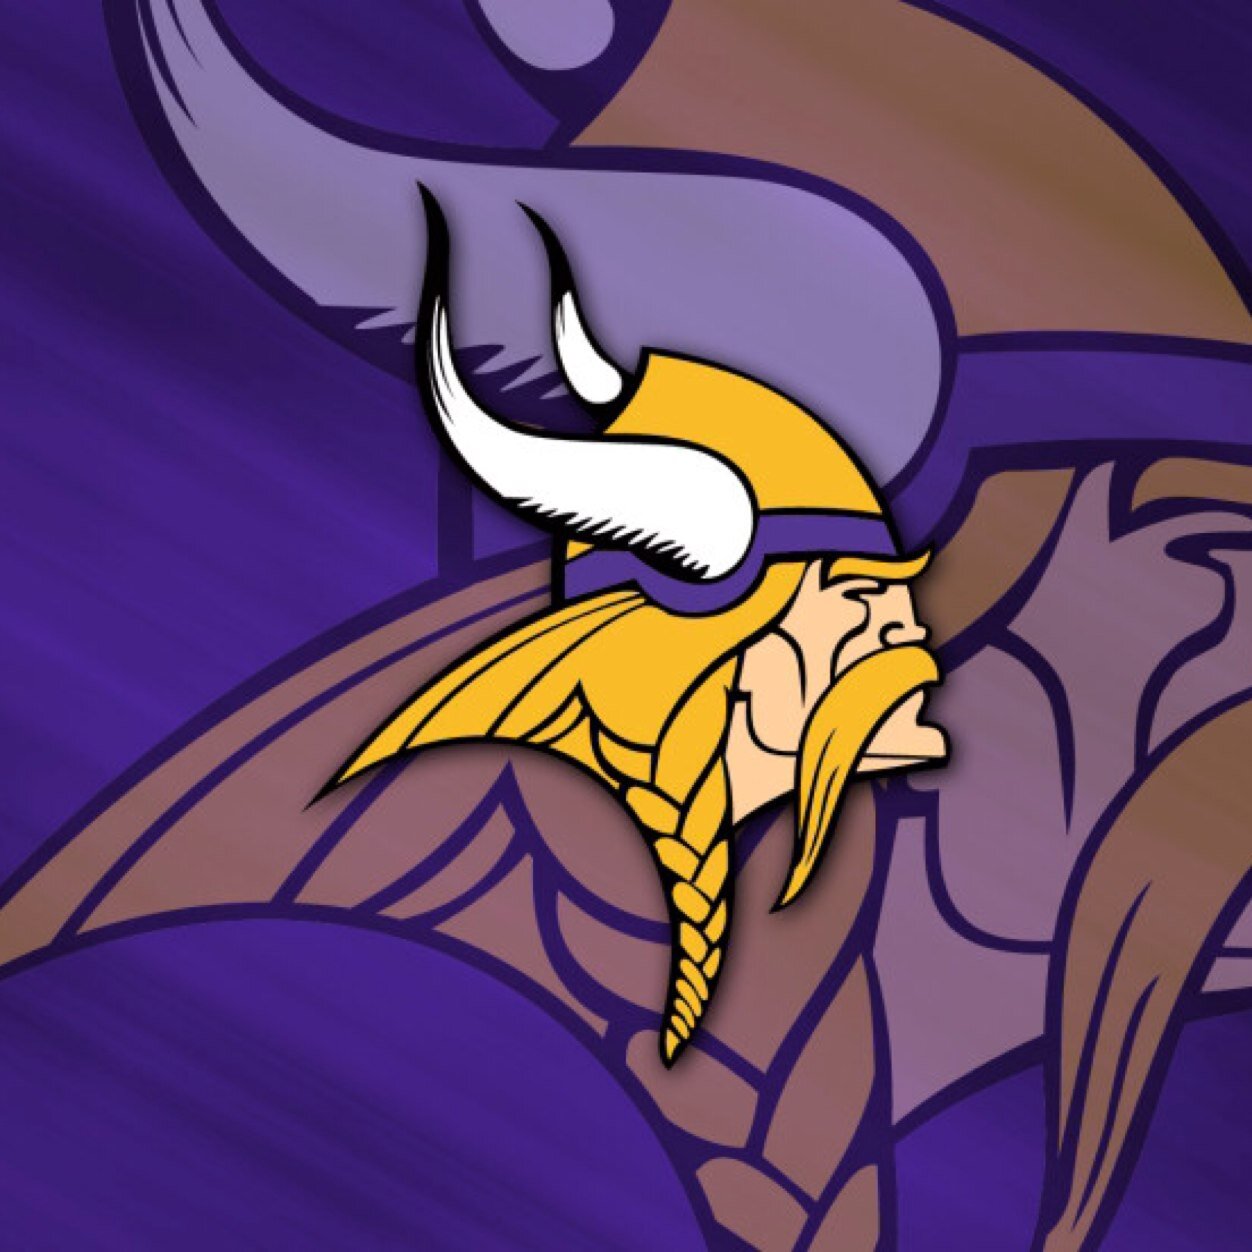 The Official Twitter for the CFM Minnesota Vikings! Thank you to the Owner Ziggy Wilf! Ran by @gators_rock GT:GATORSROCK4